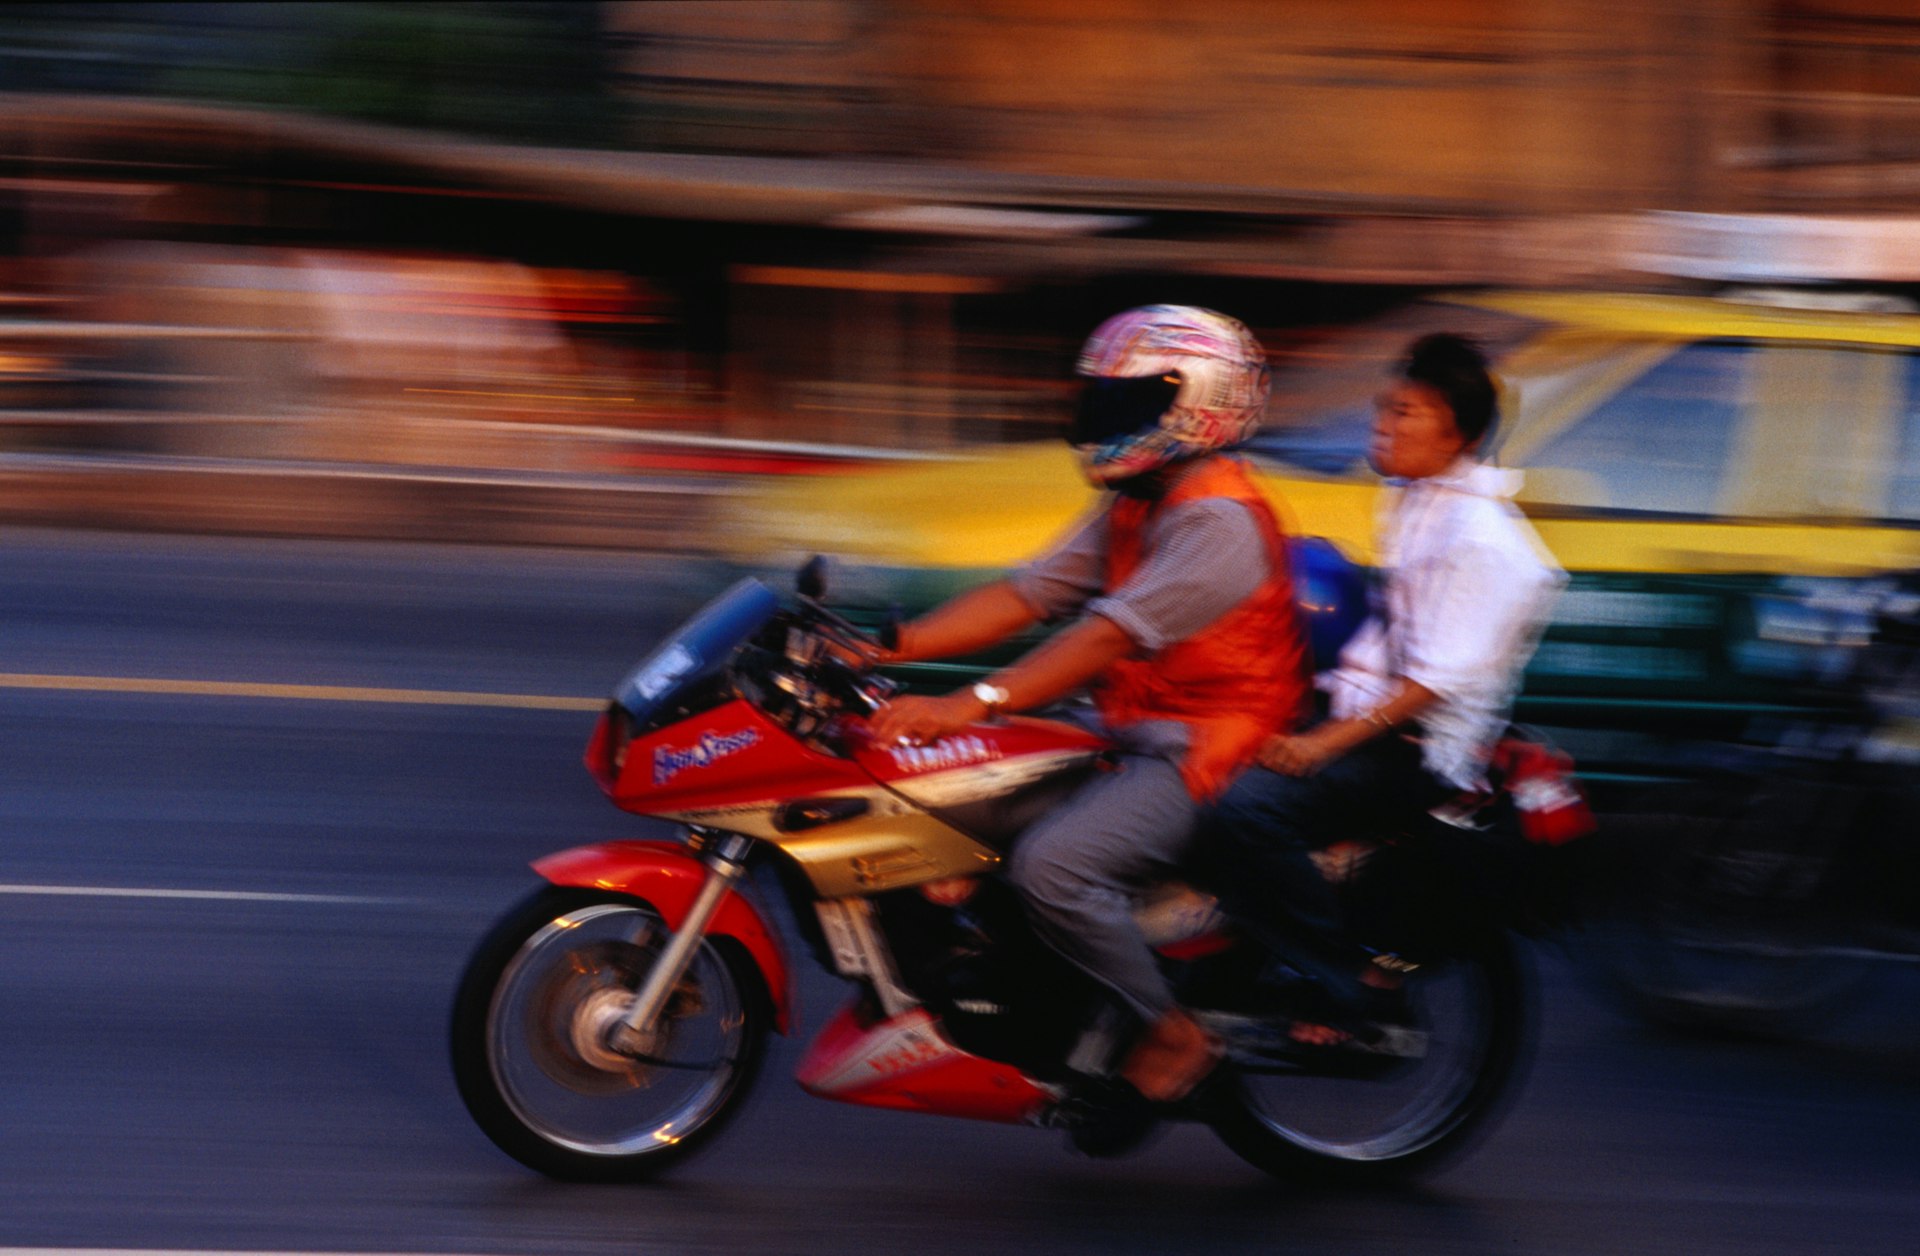 A motorcycle with a passenger flashes past in a blur on Th Ratchaprarop in Bangkok, Thailand.